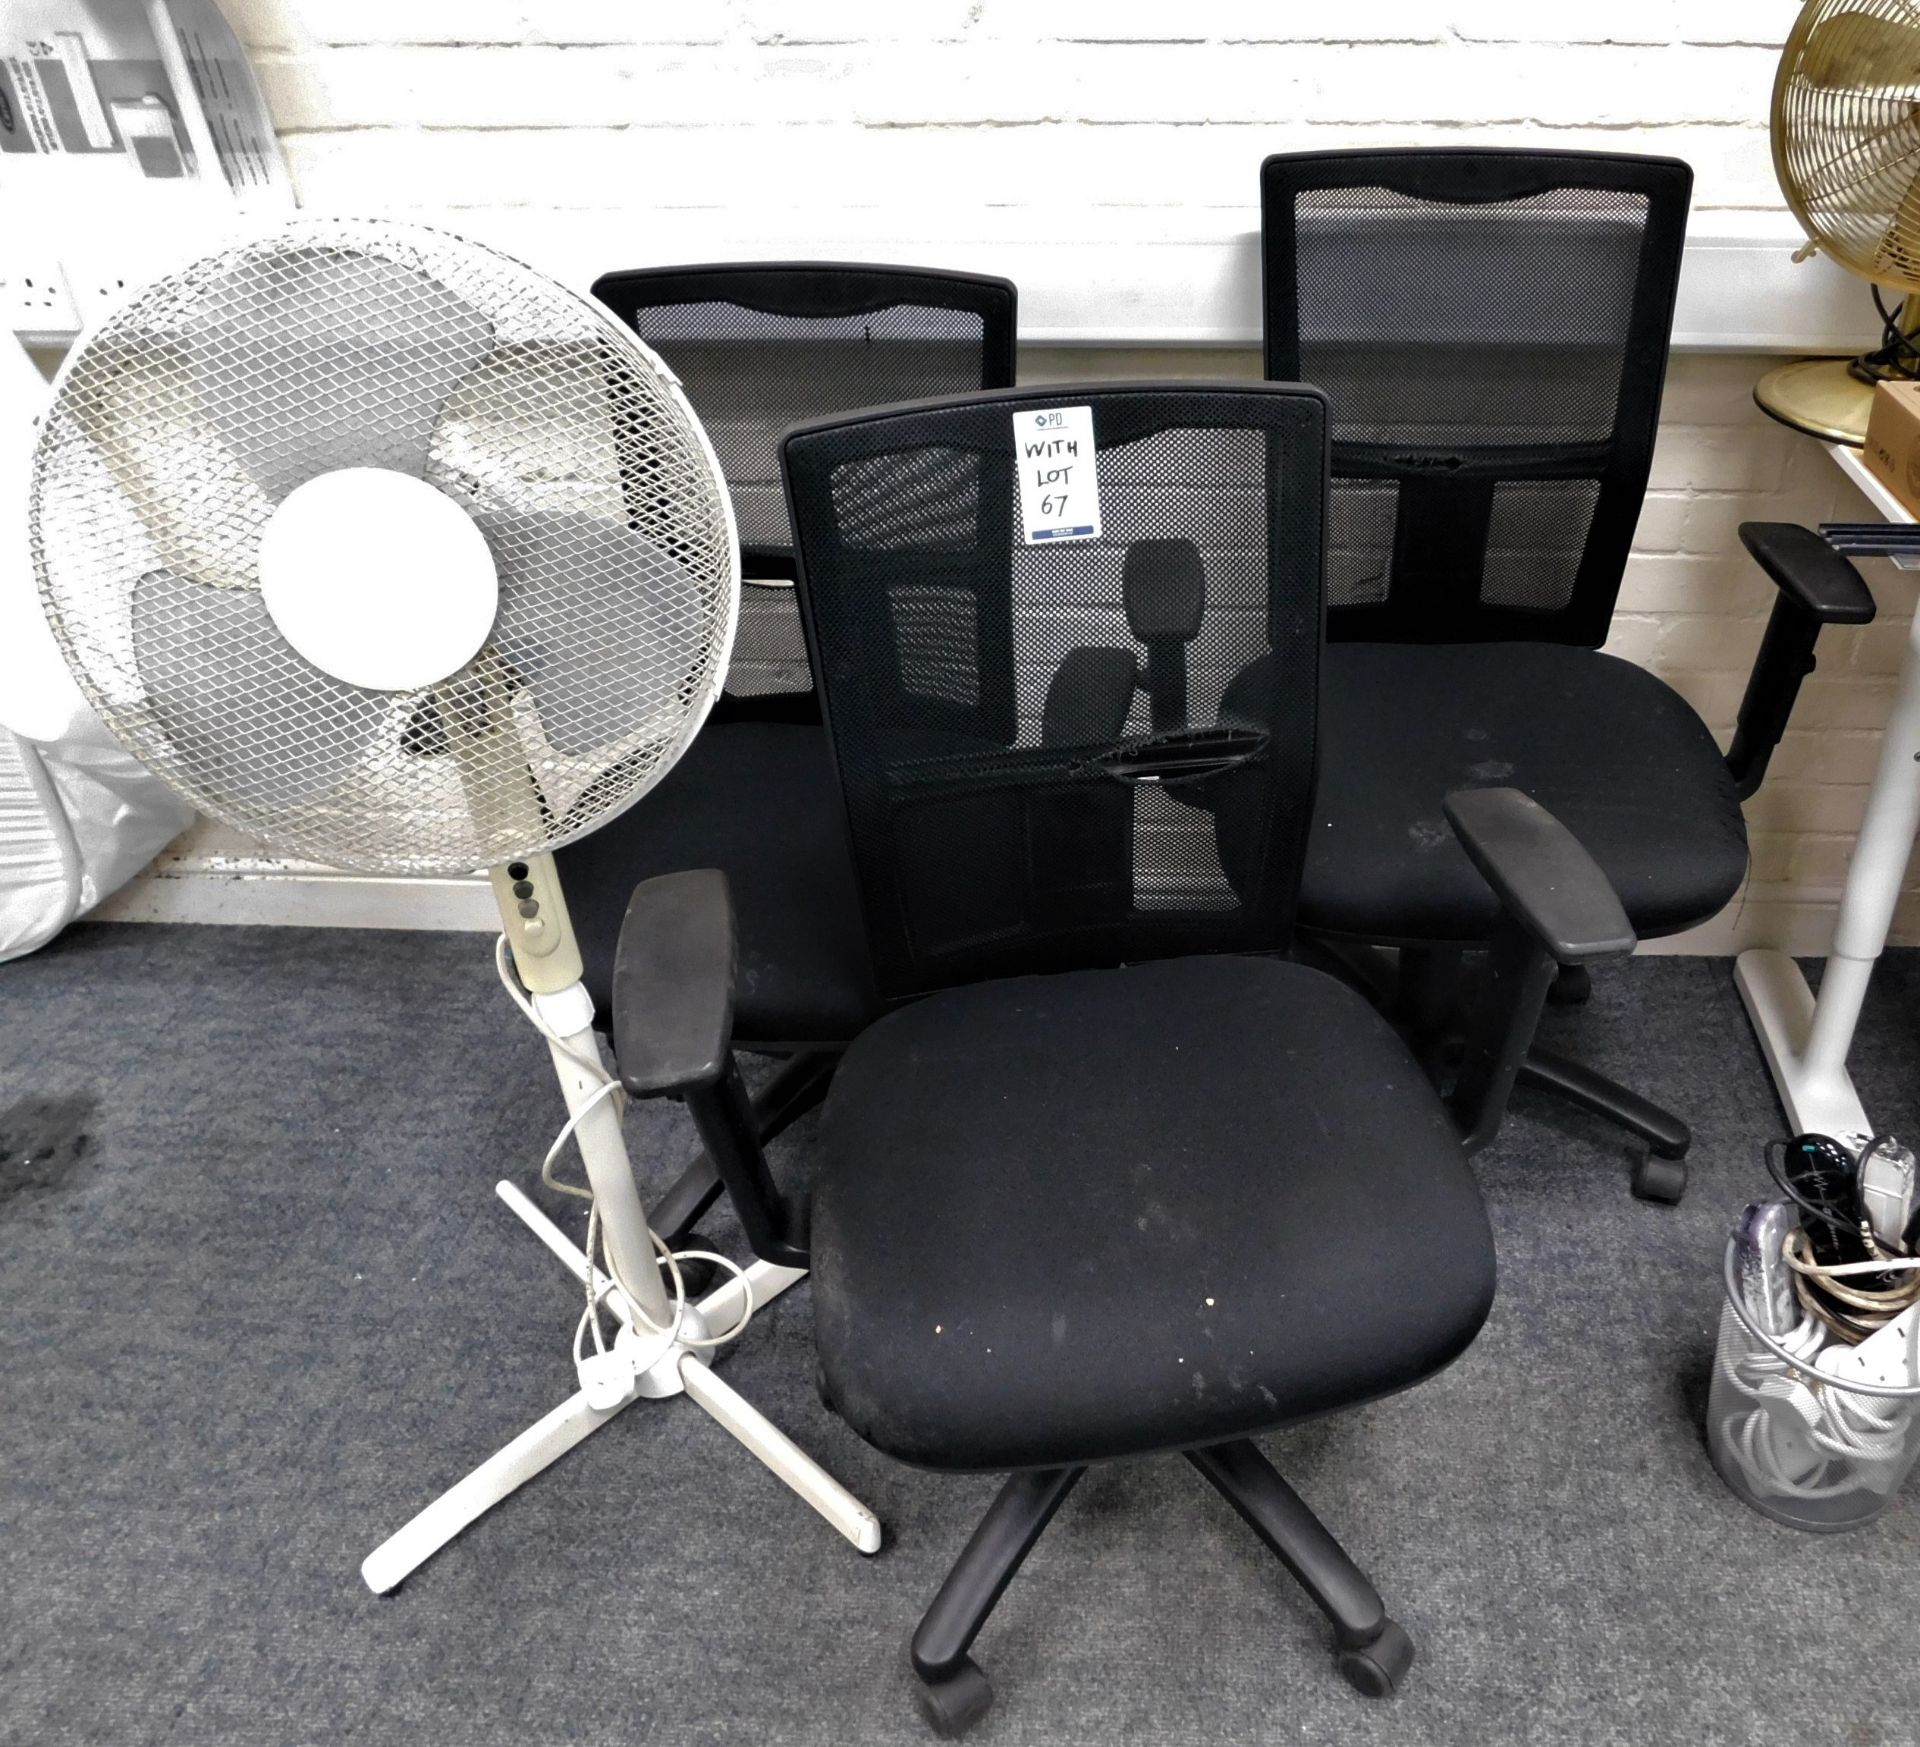 Three Mesh-Back Chairs (damaged), Brother HL-2240D Printer, TFT Monitor, Citizen label Printer, - Image 2 of 3